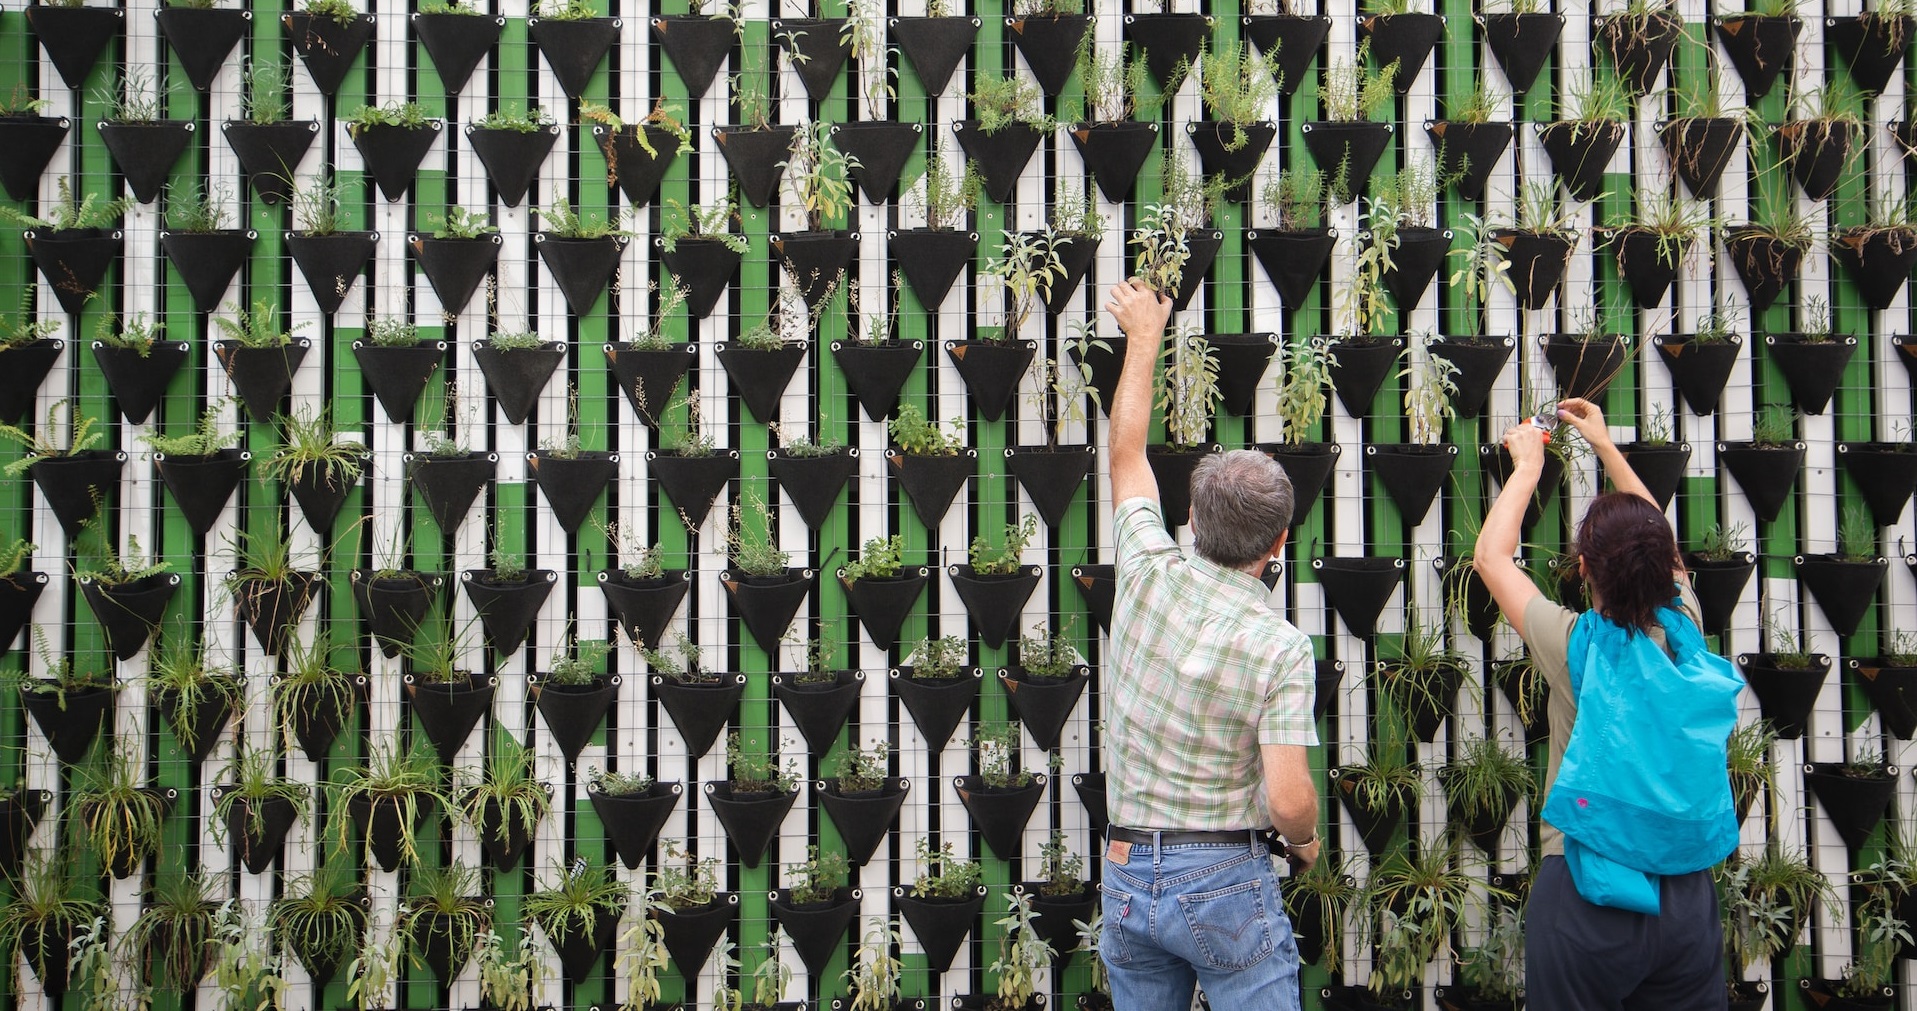 Two people with their backs to the camera are adding plants to a wall garden.